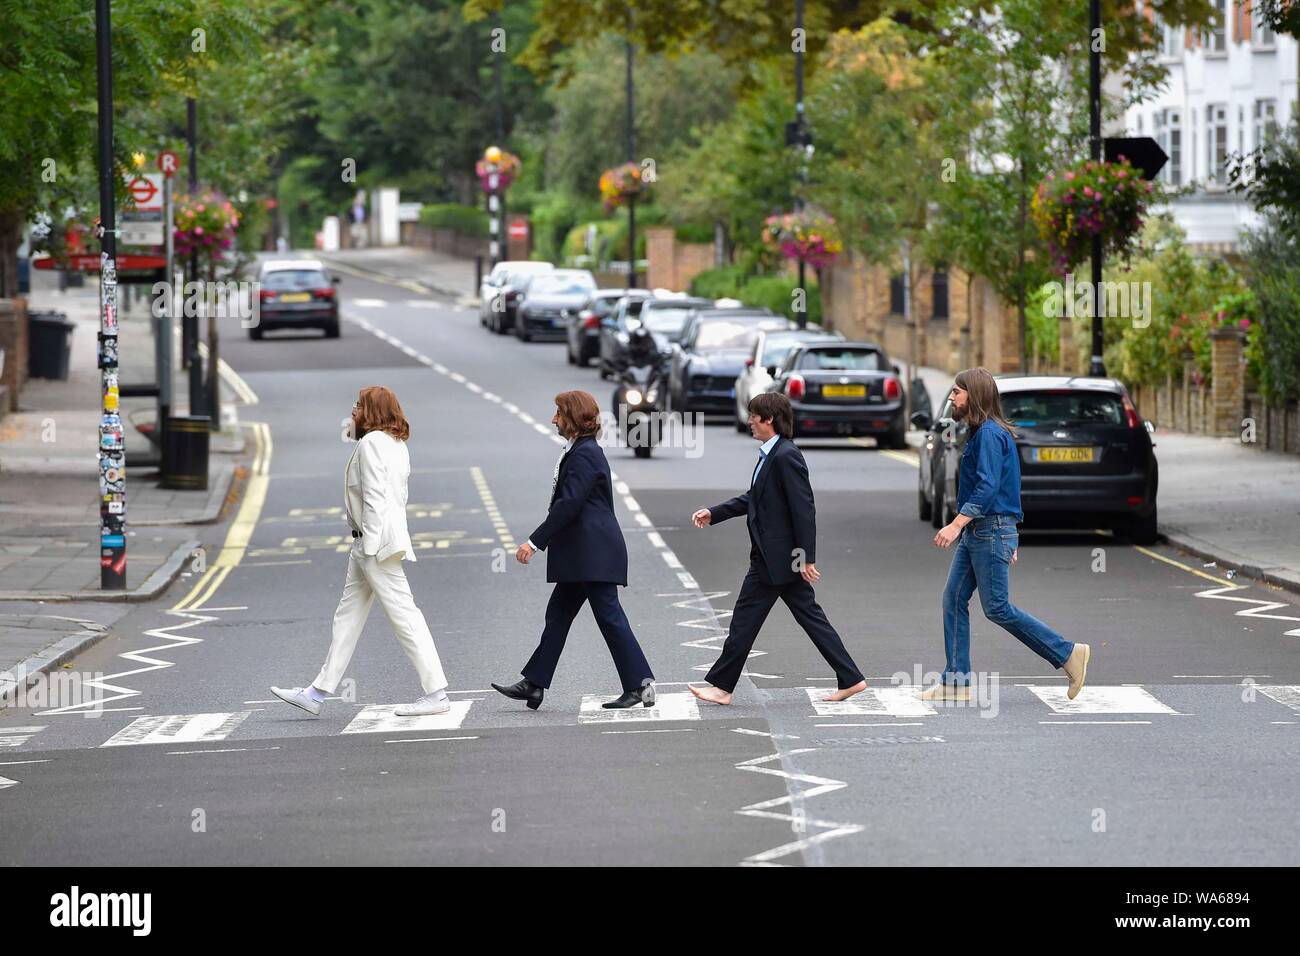 The Beatles Took Their 'Abbey Road' Walk 50 Years Ago